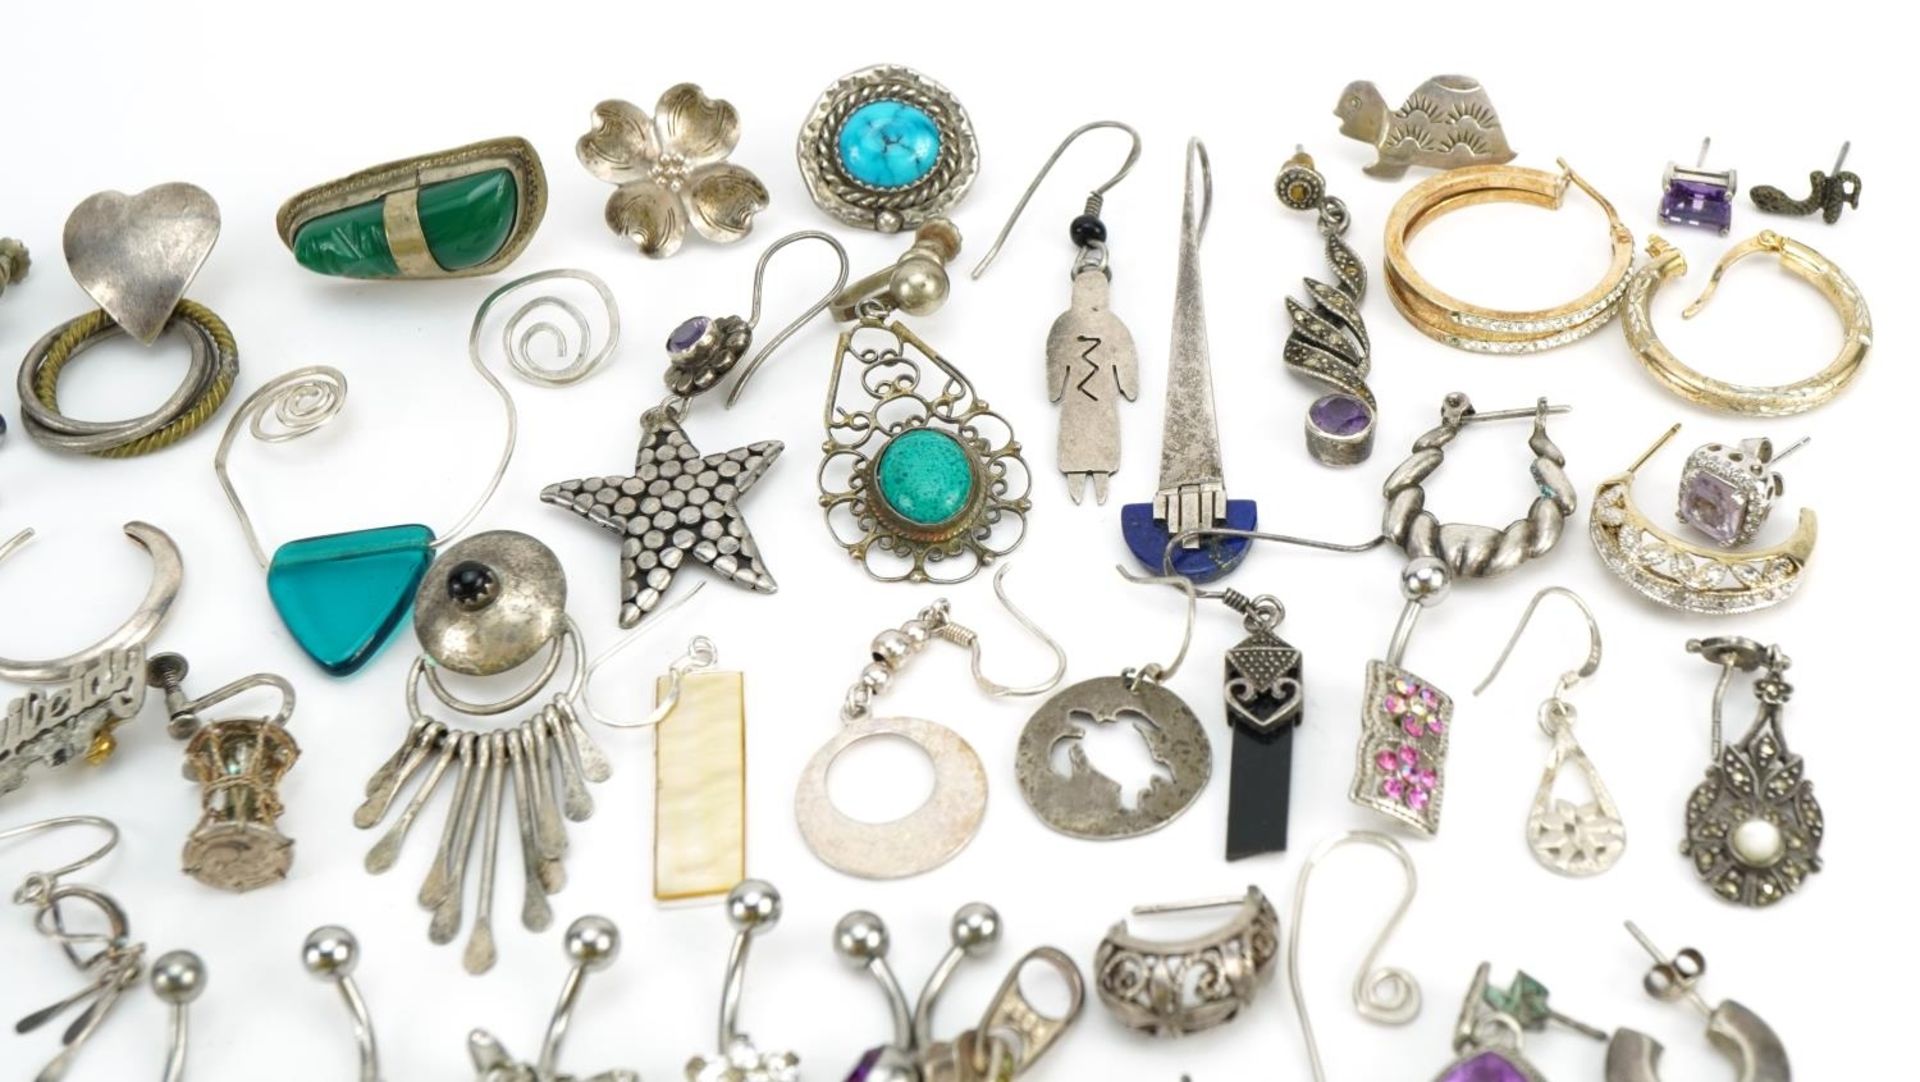 Vintage and later silver and white metal jewellery including earrings, pendants and blue enamel - Image 3 of 5